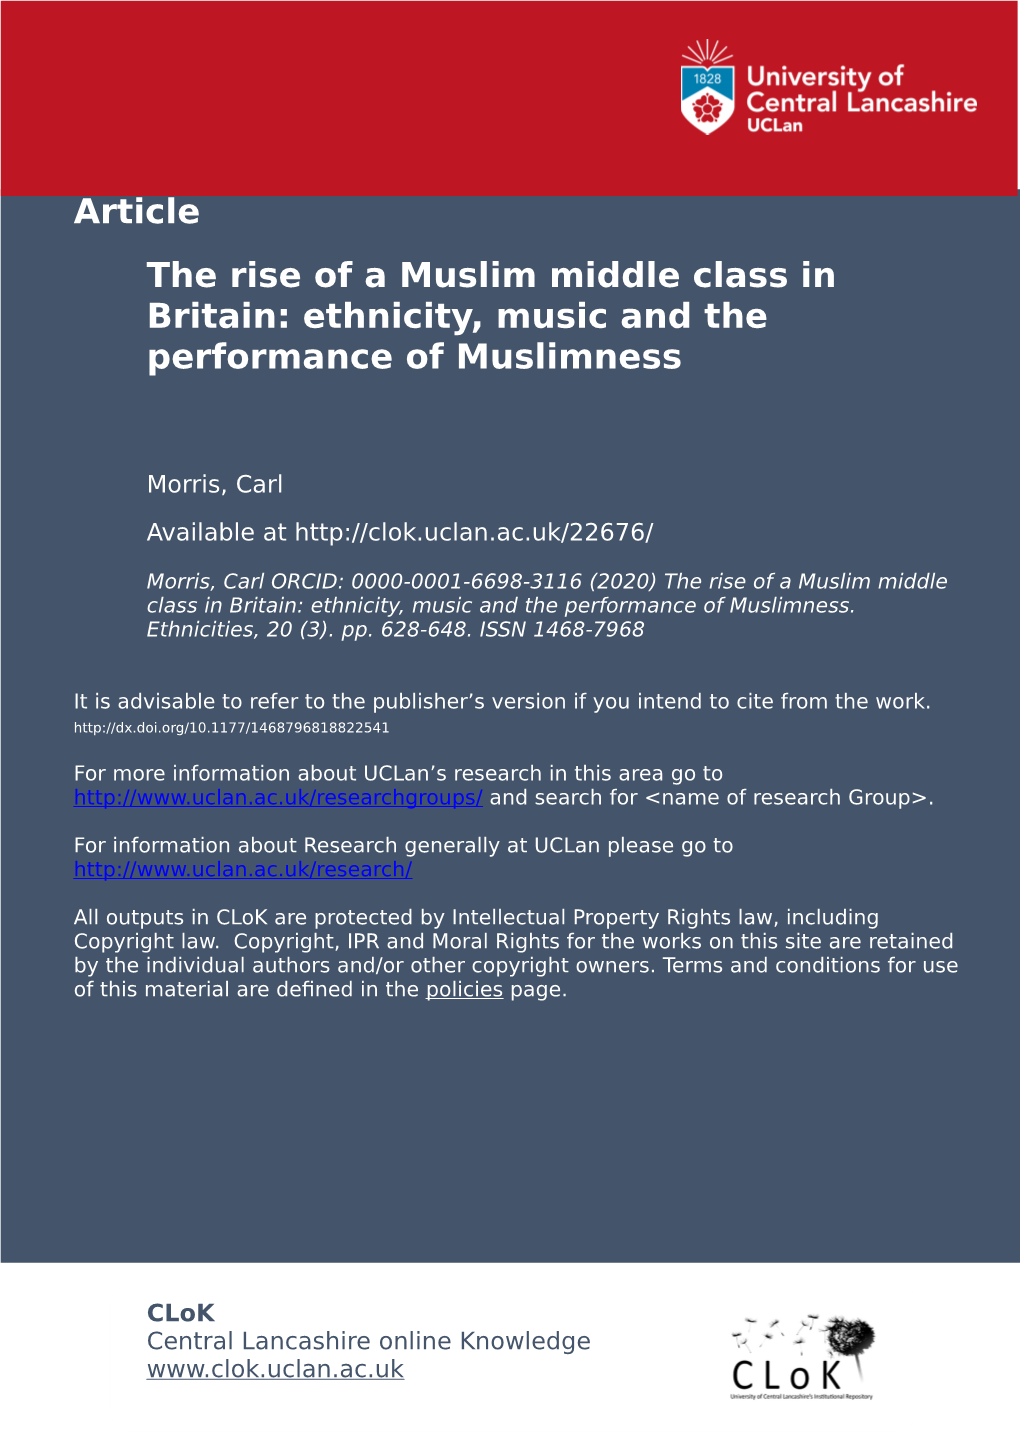 Article the Rise of a Muslim Middle Class in Britain: Ethnicity, Music and the Performance of Muslimness